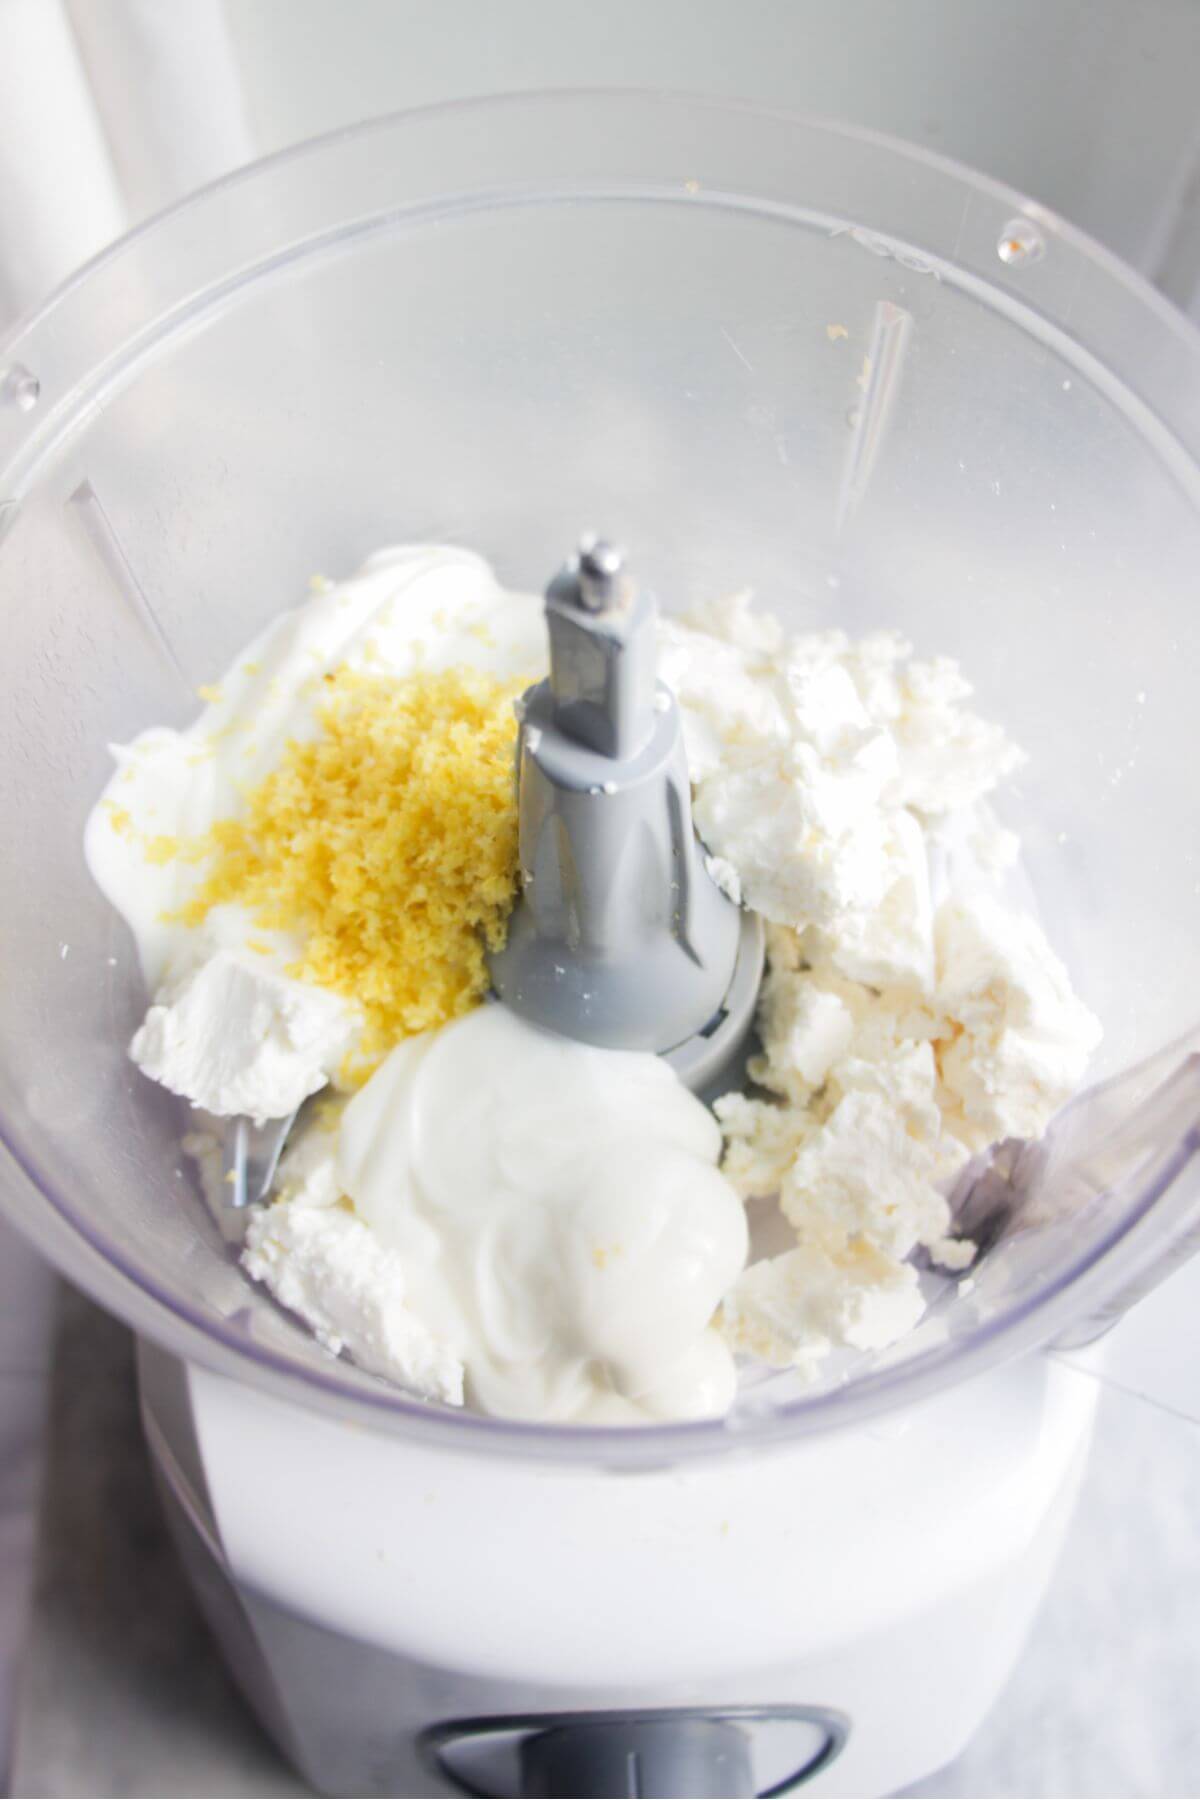 Ingredients for whipped feta in the bowl of a food processor.